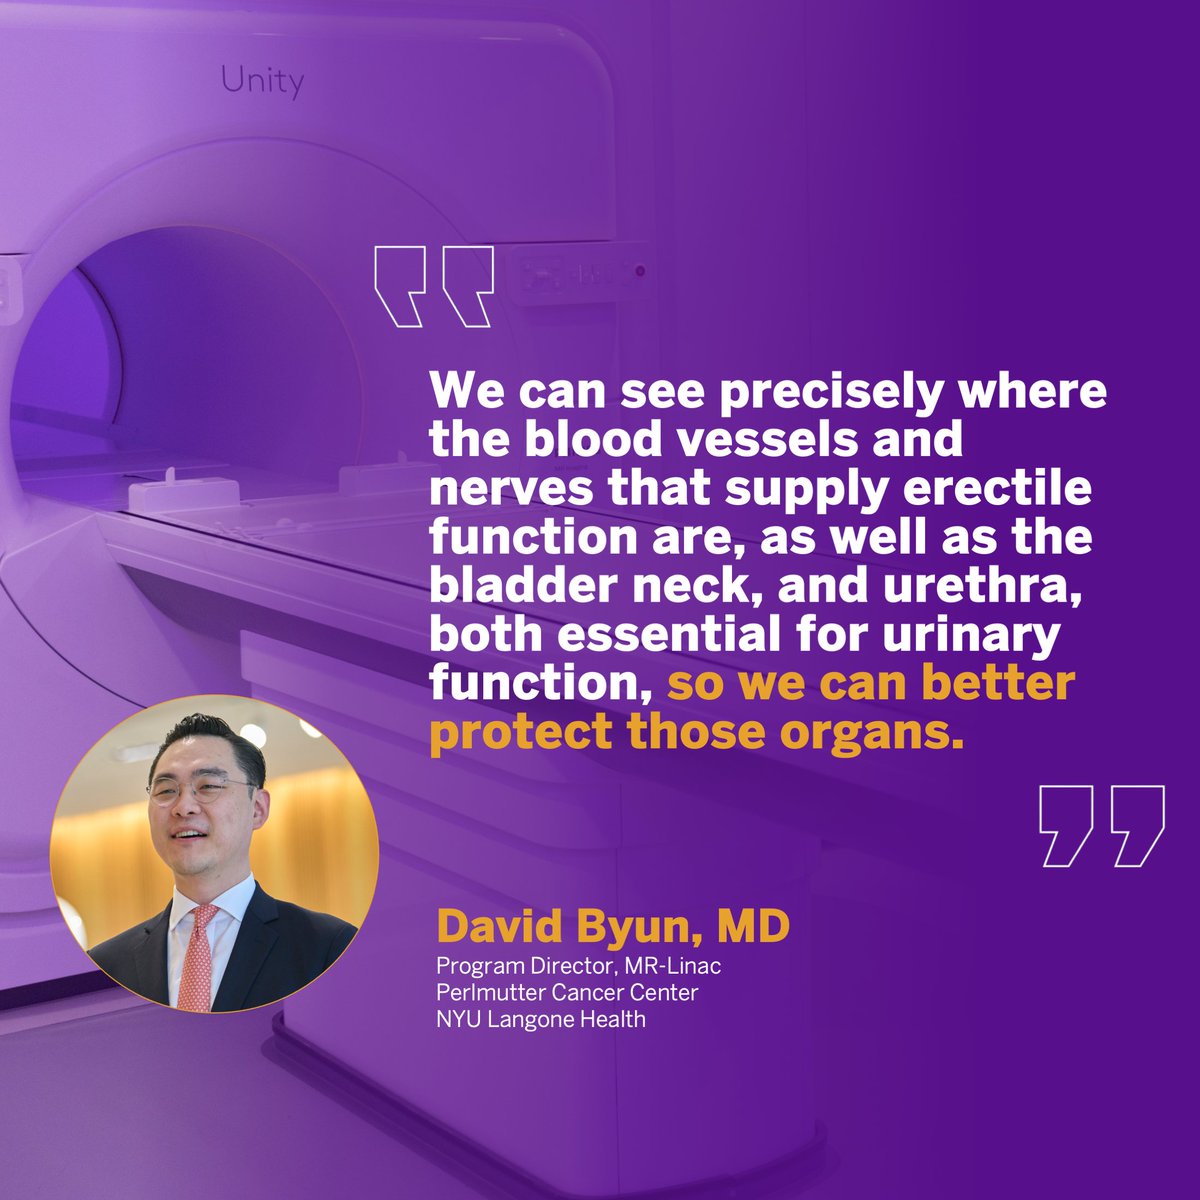 To treat tumors more precisely, @NYULH_RadOnc utilizes the latest radiotherapy technology, the #MRLinac. Under the care of Drs. David Byun & Michael Zelefsky, Stuart Dryburgh (@Stuartkino) is the first to try this cutting-edge approach in #prostatecancer: bit.ly/3WDZCeu